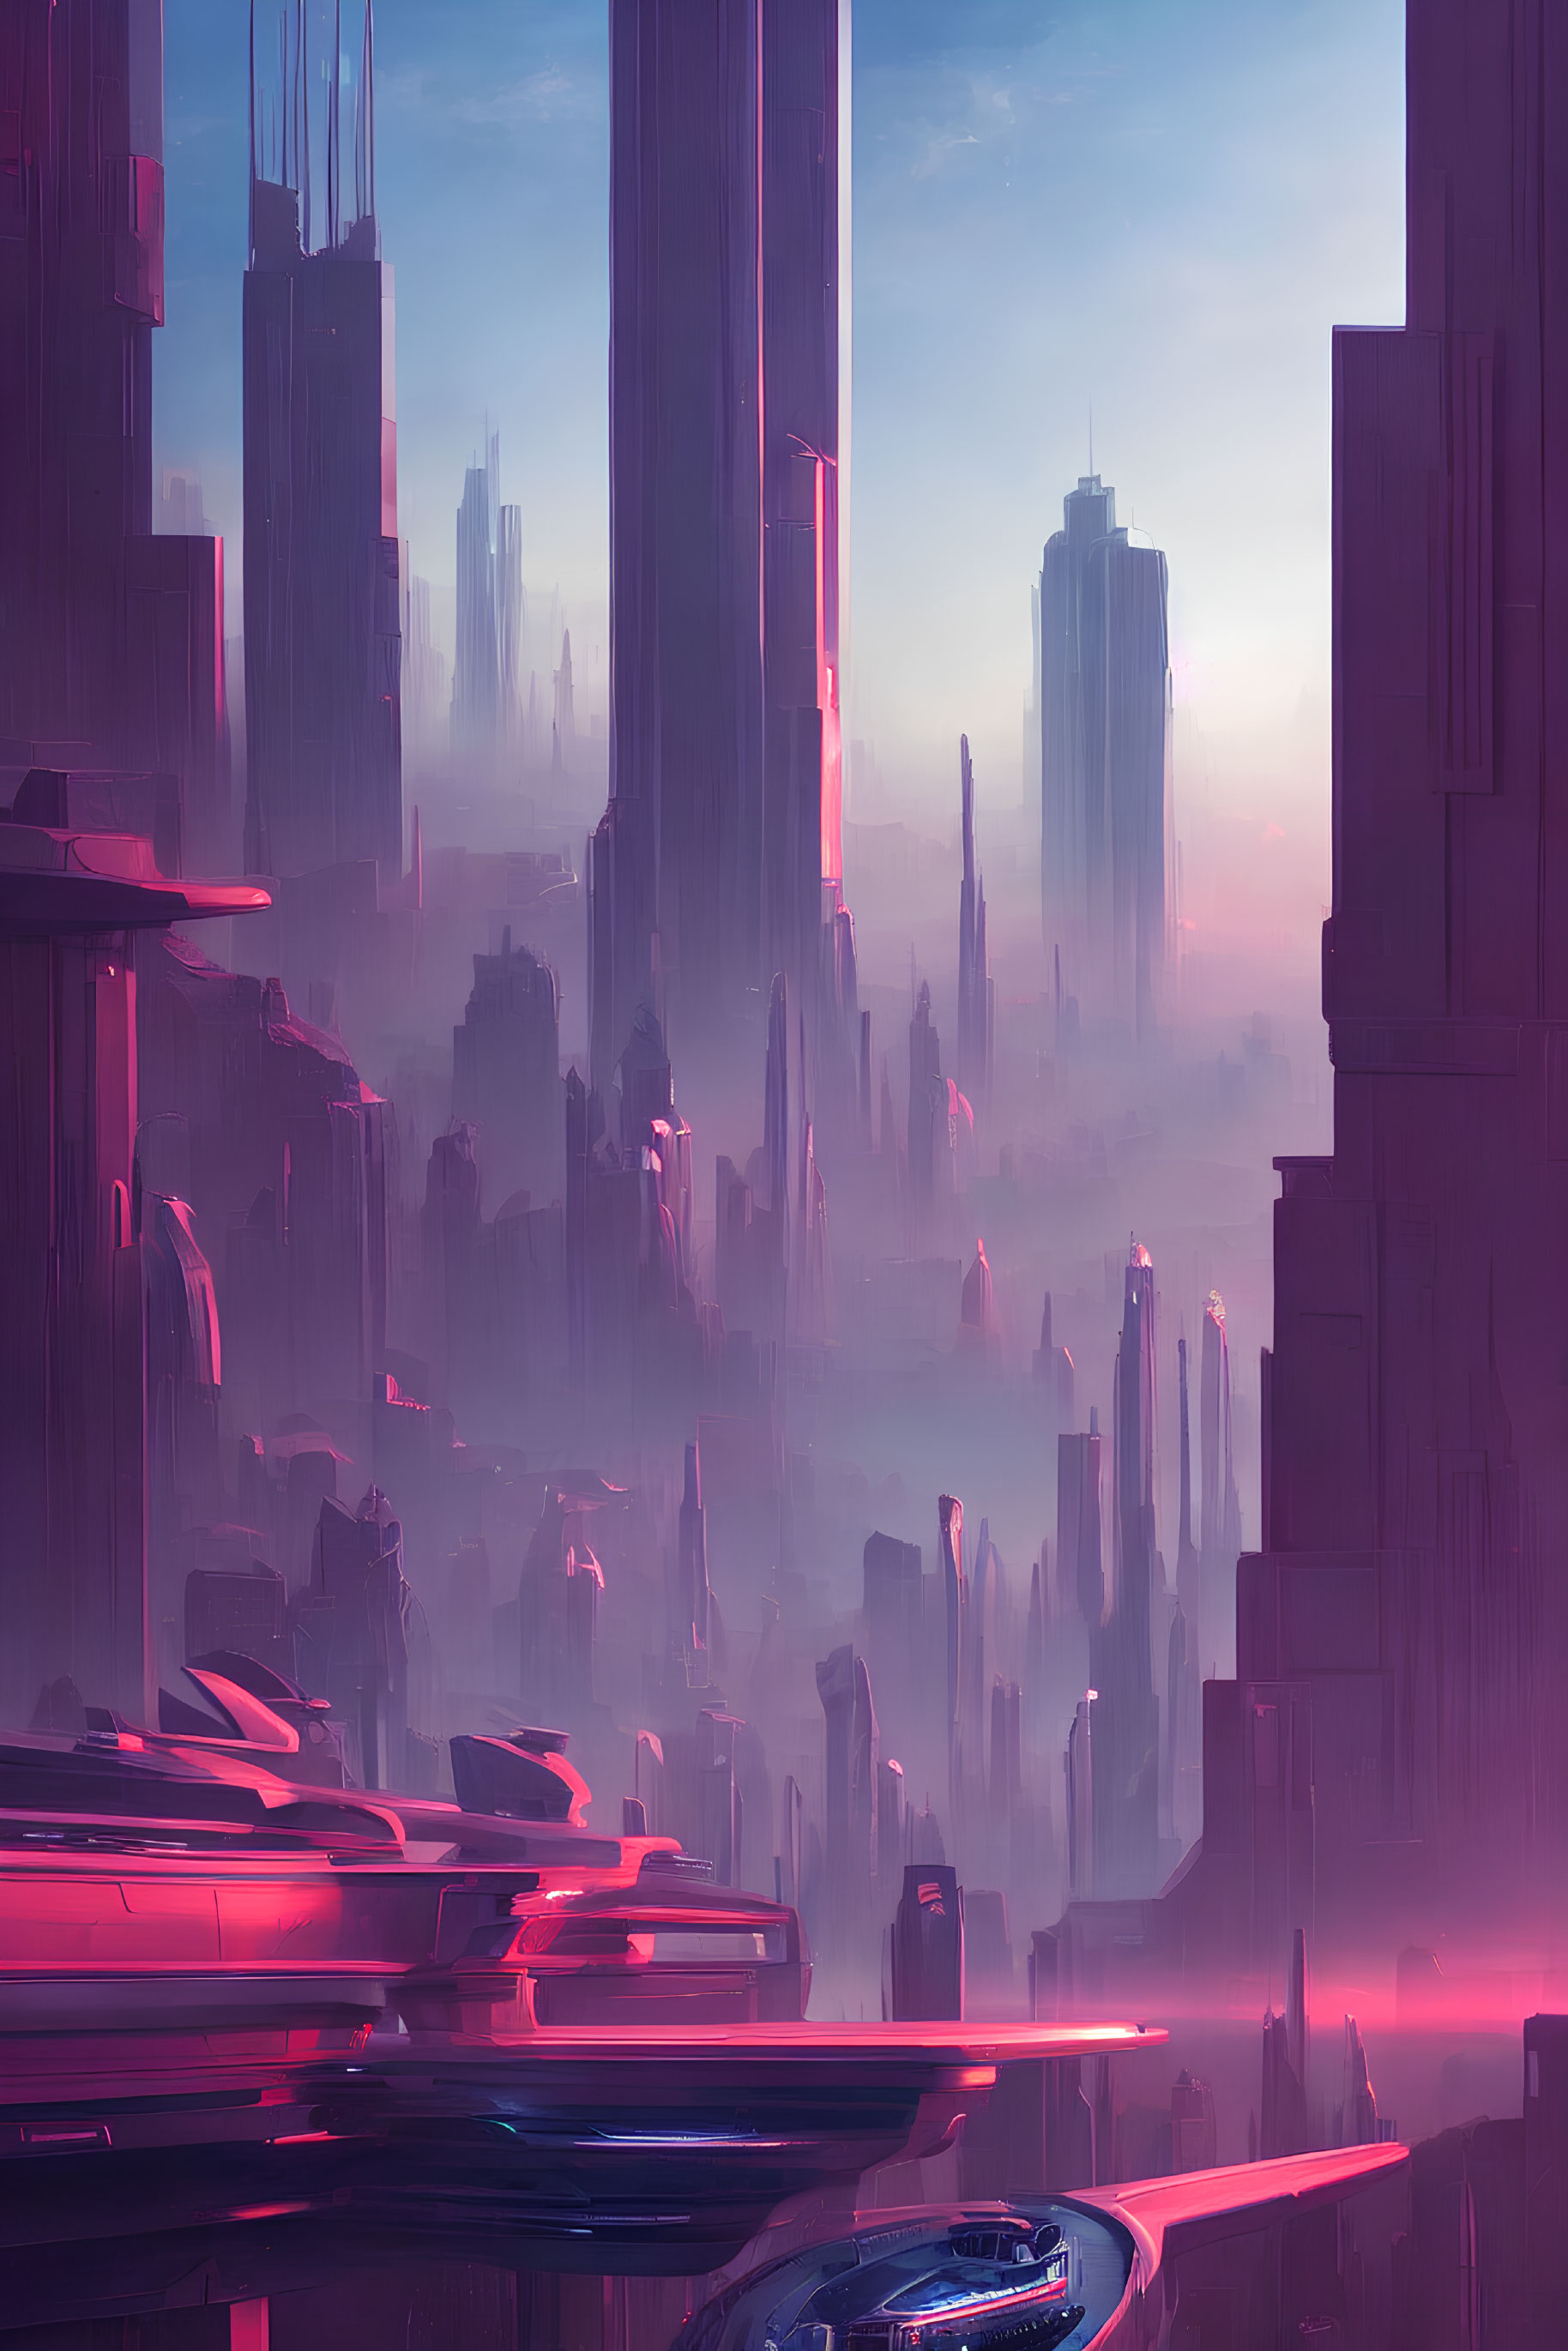 Futuristic cityscape with pink and blue skyscrapers and flying vehicles